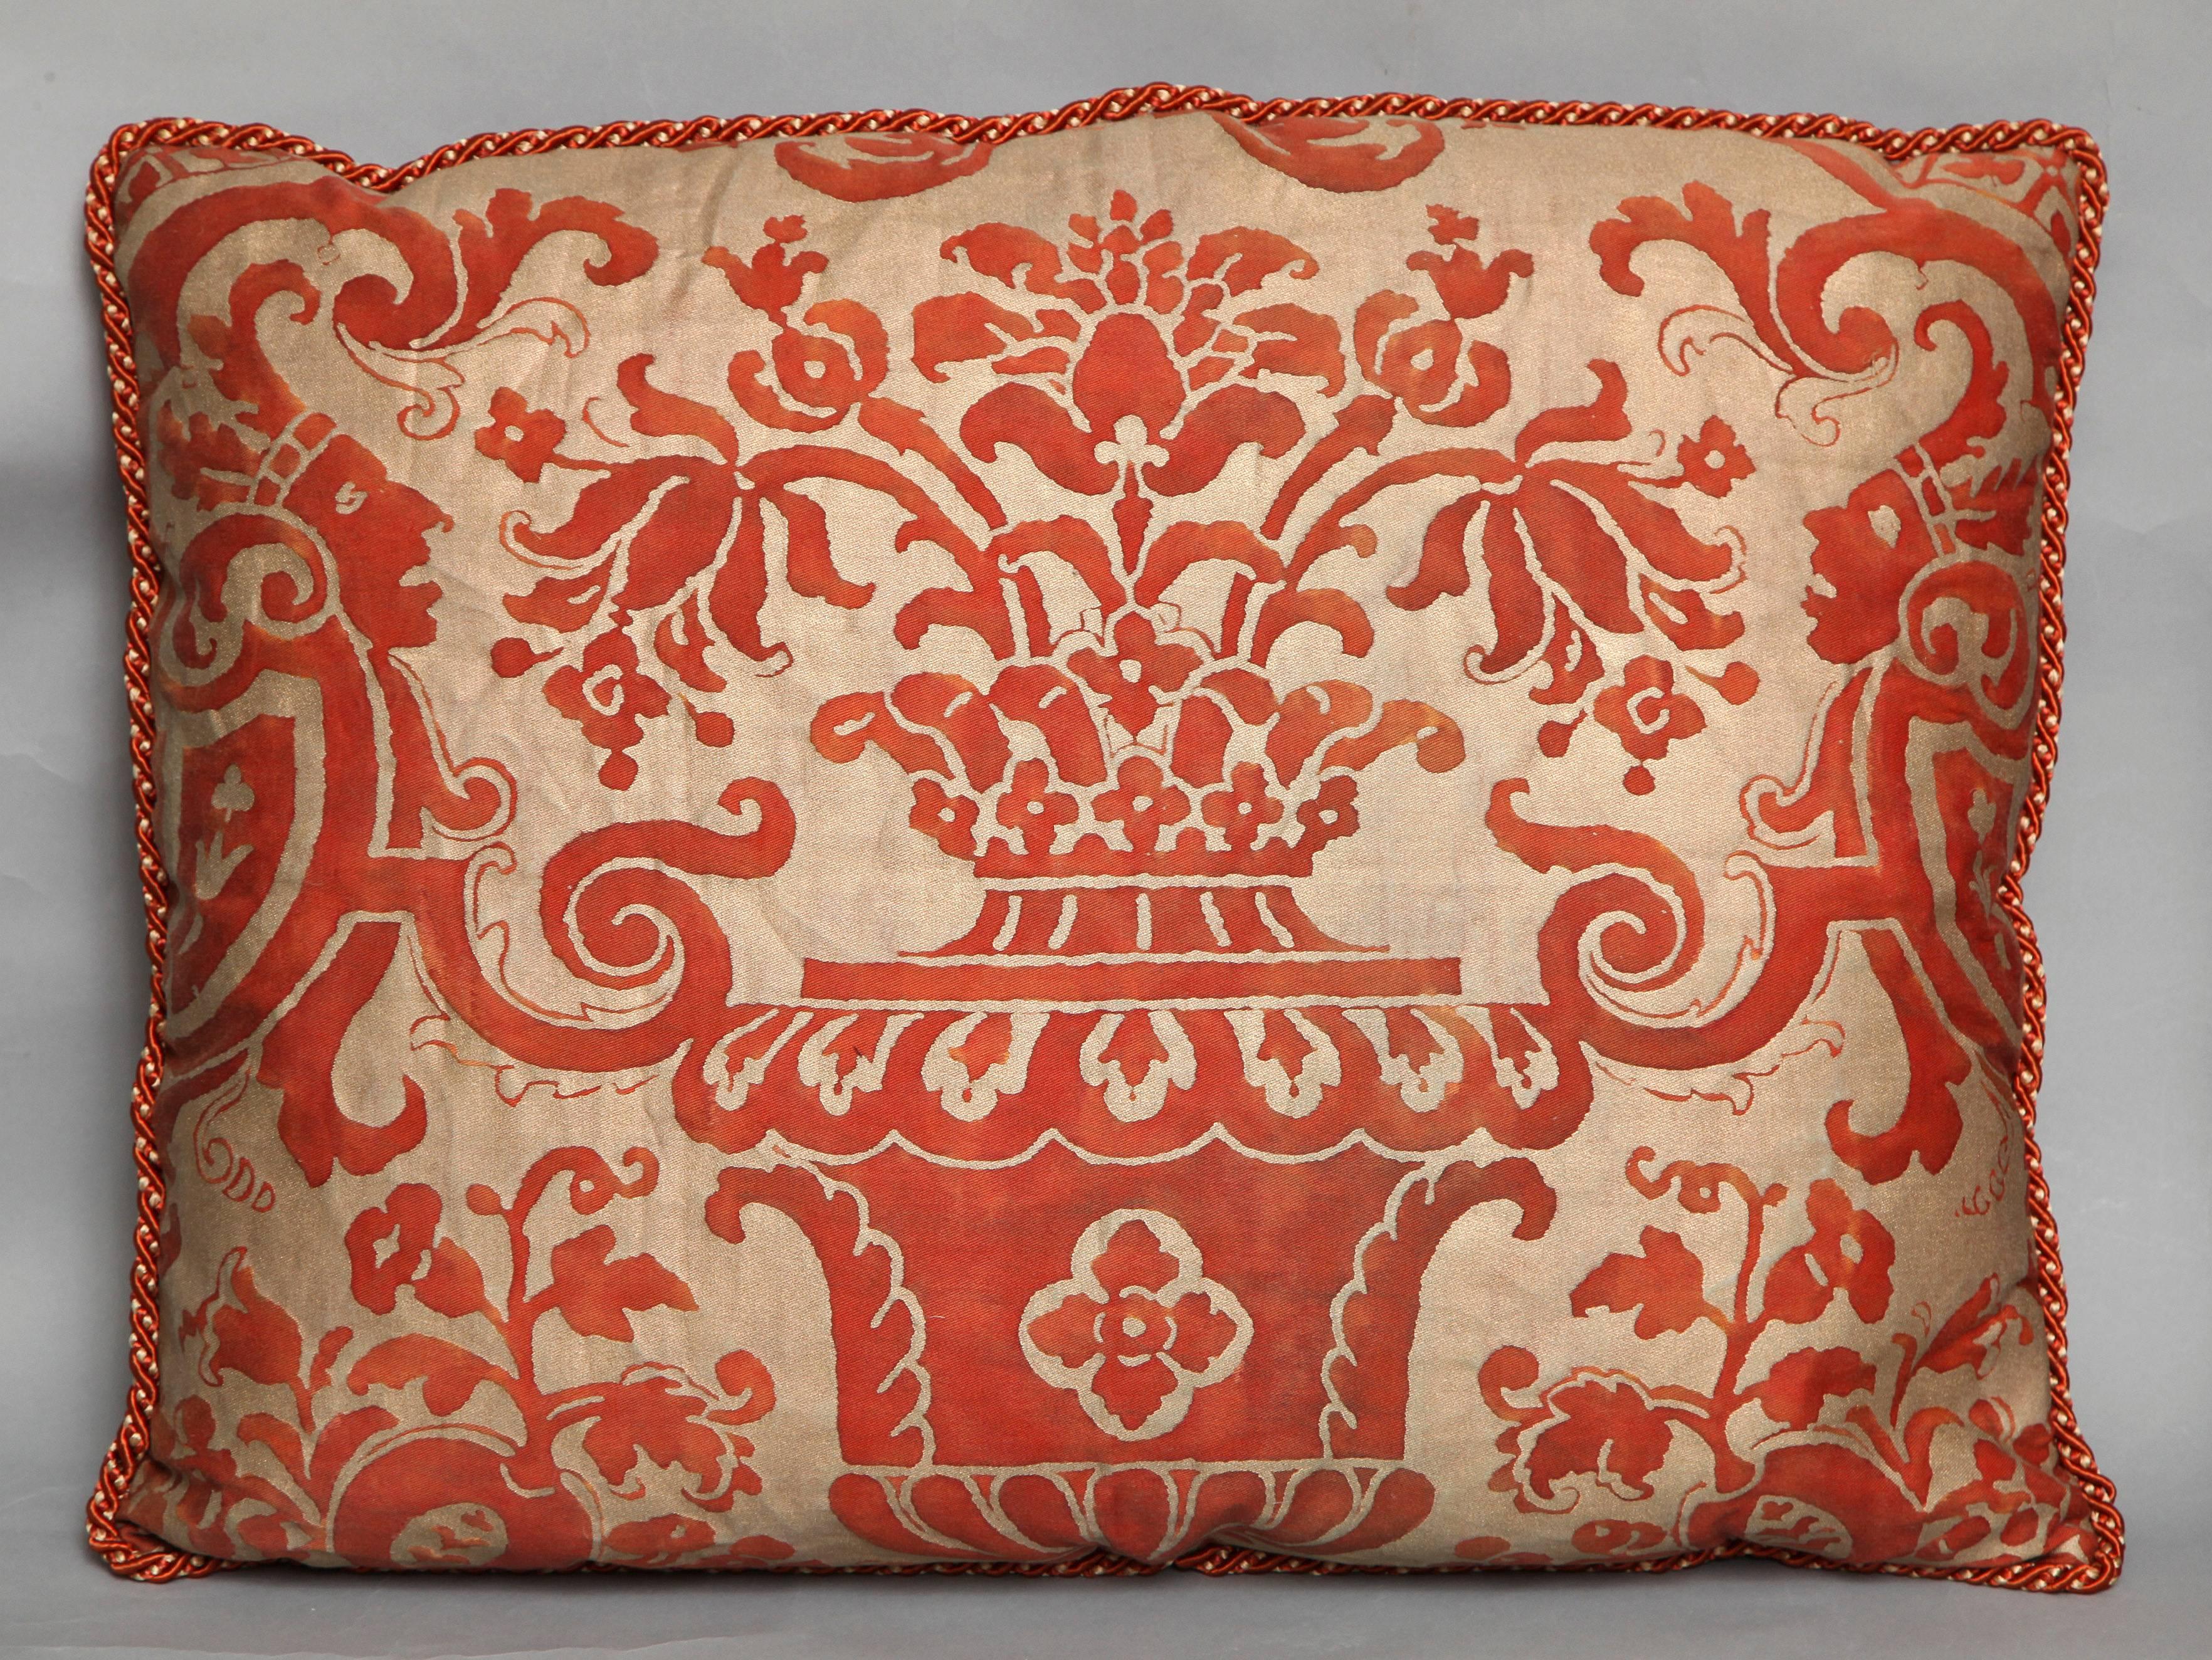 American Pair of Fortuny Fabric Cushions in the Carnavalet Pattern